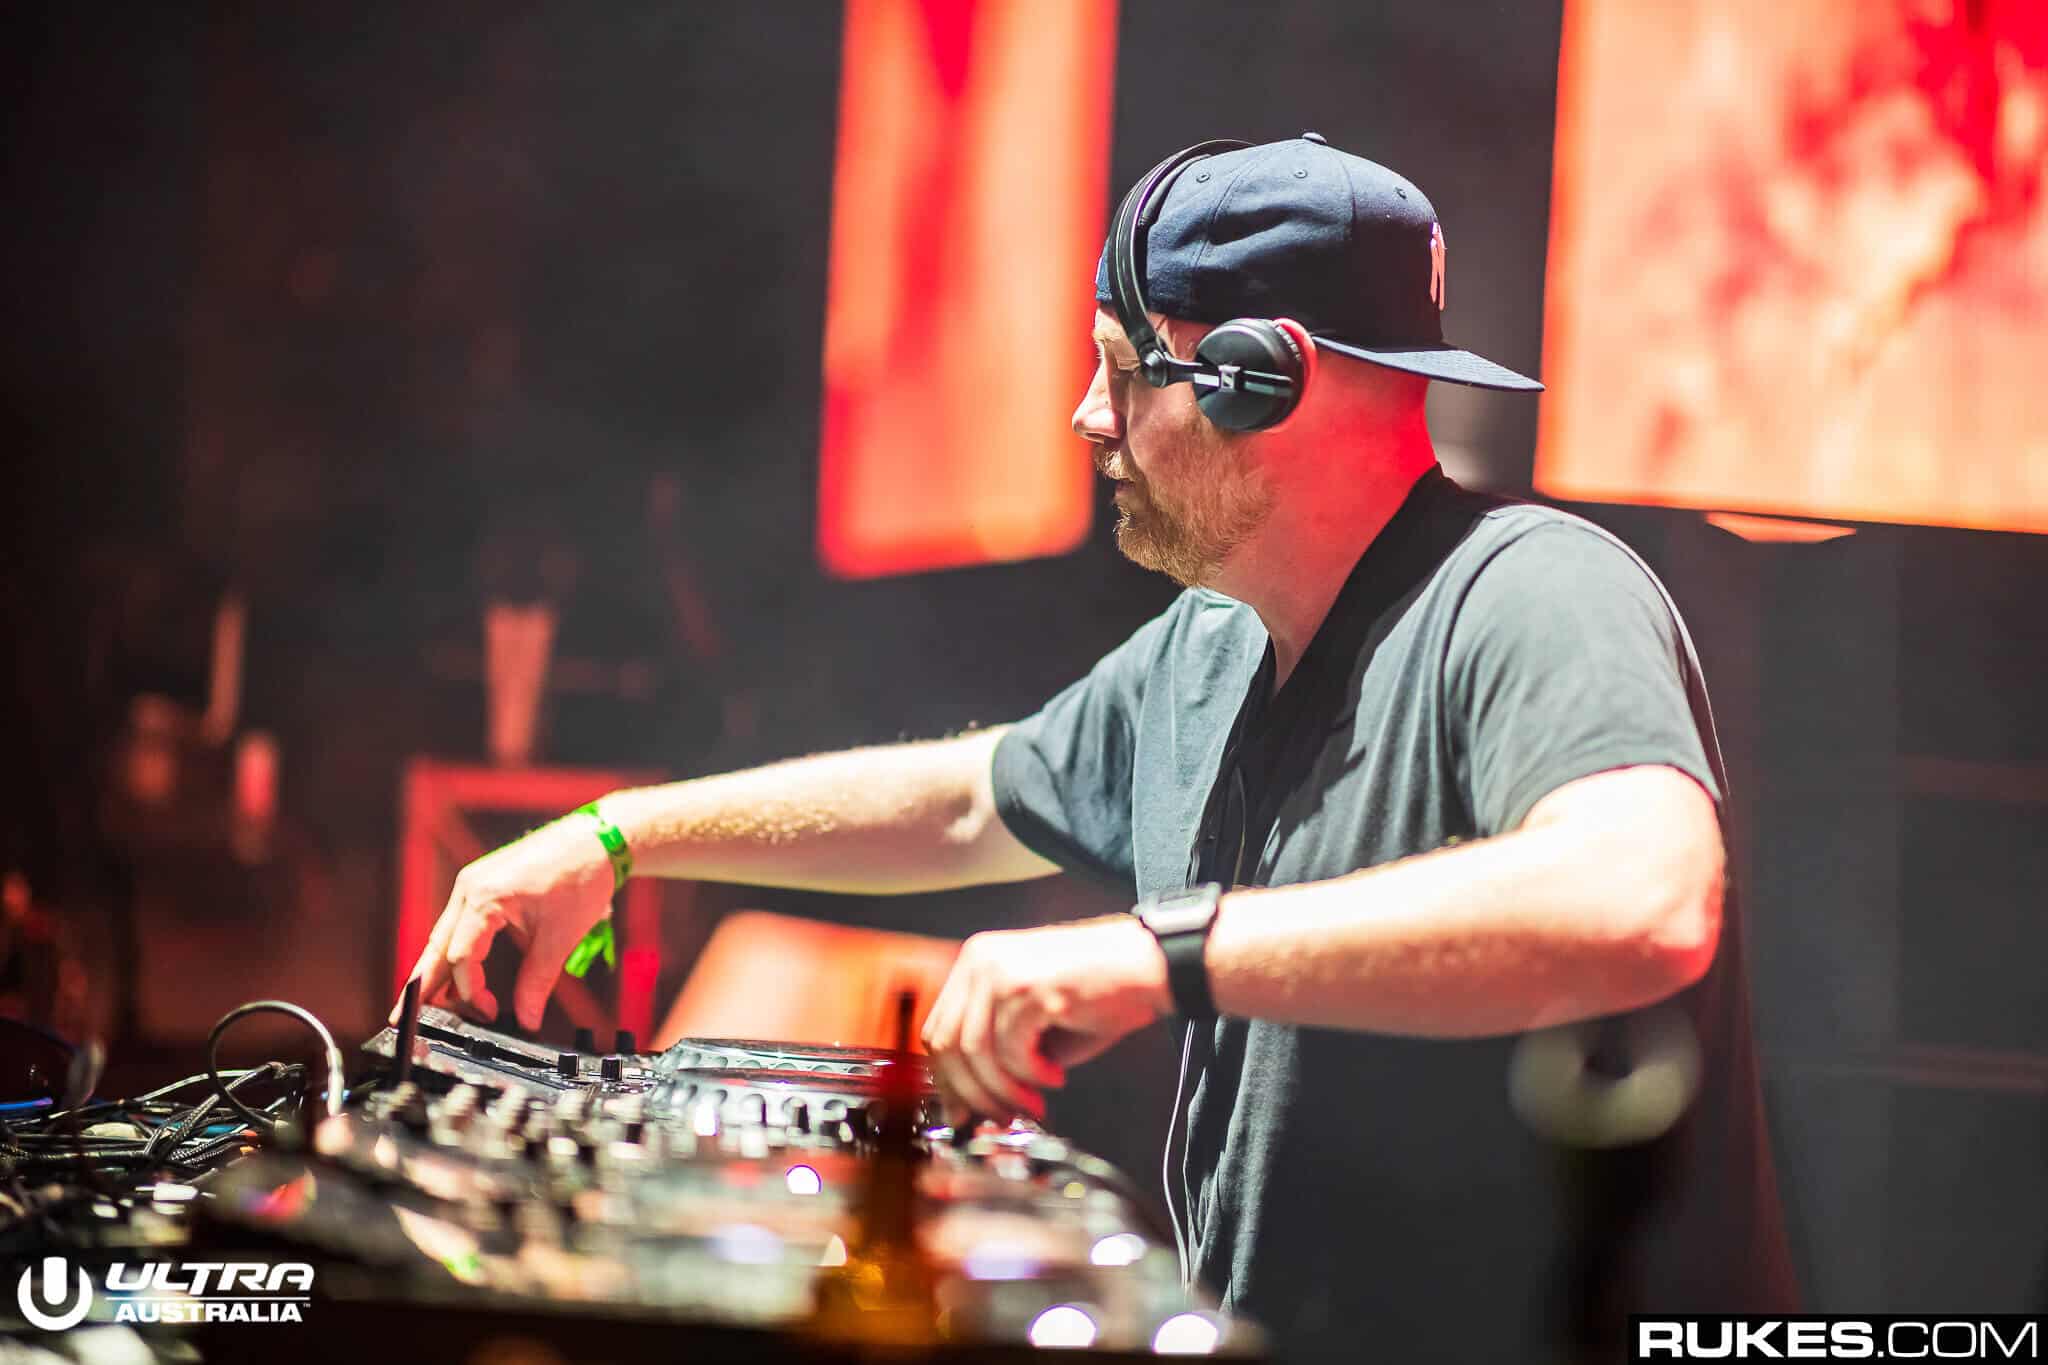 New Cirez D music on the way this month, Eric Prydz reveals